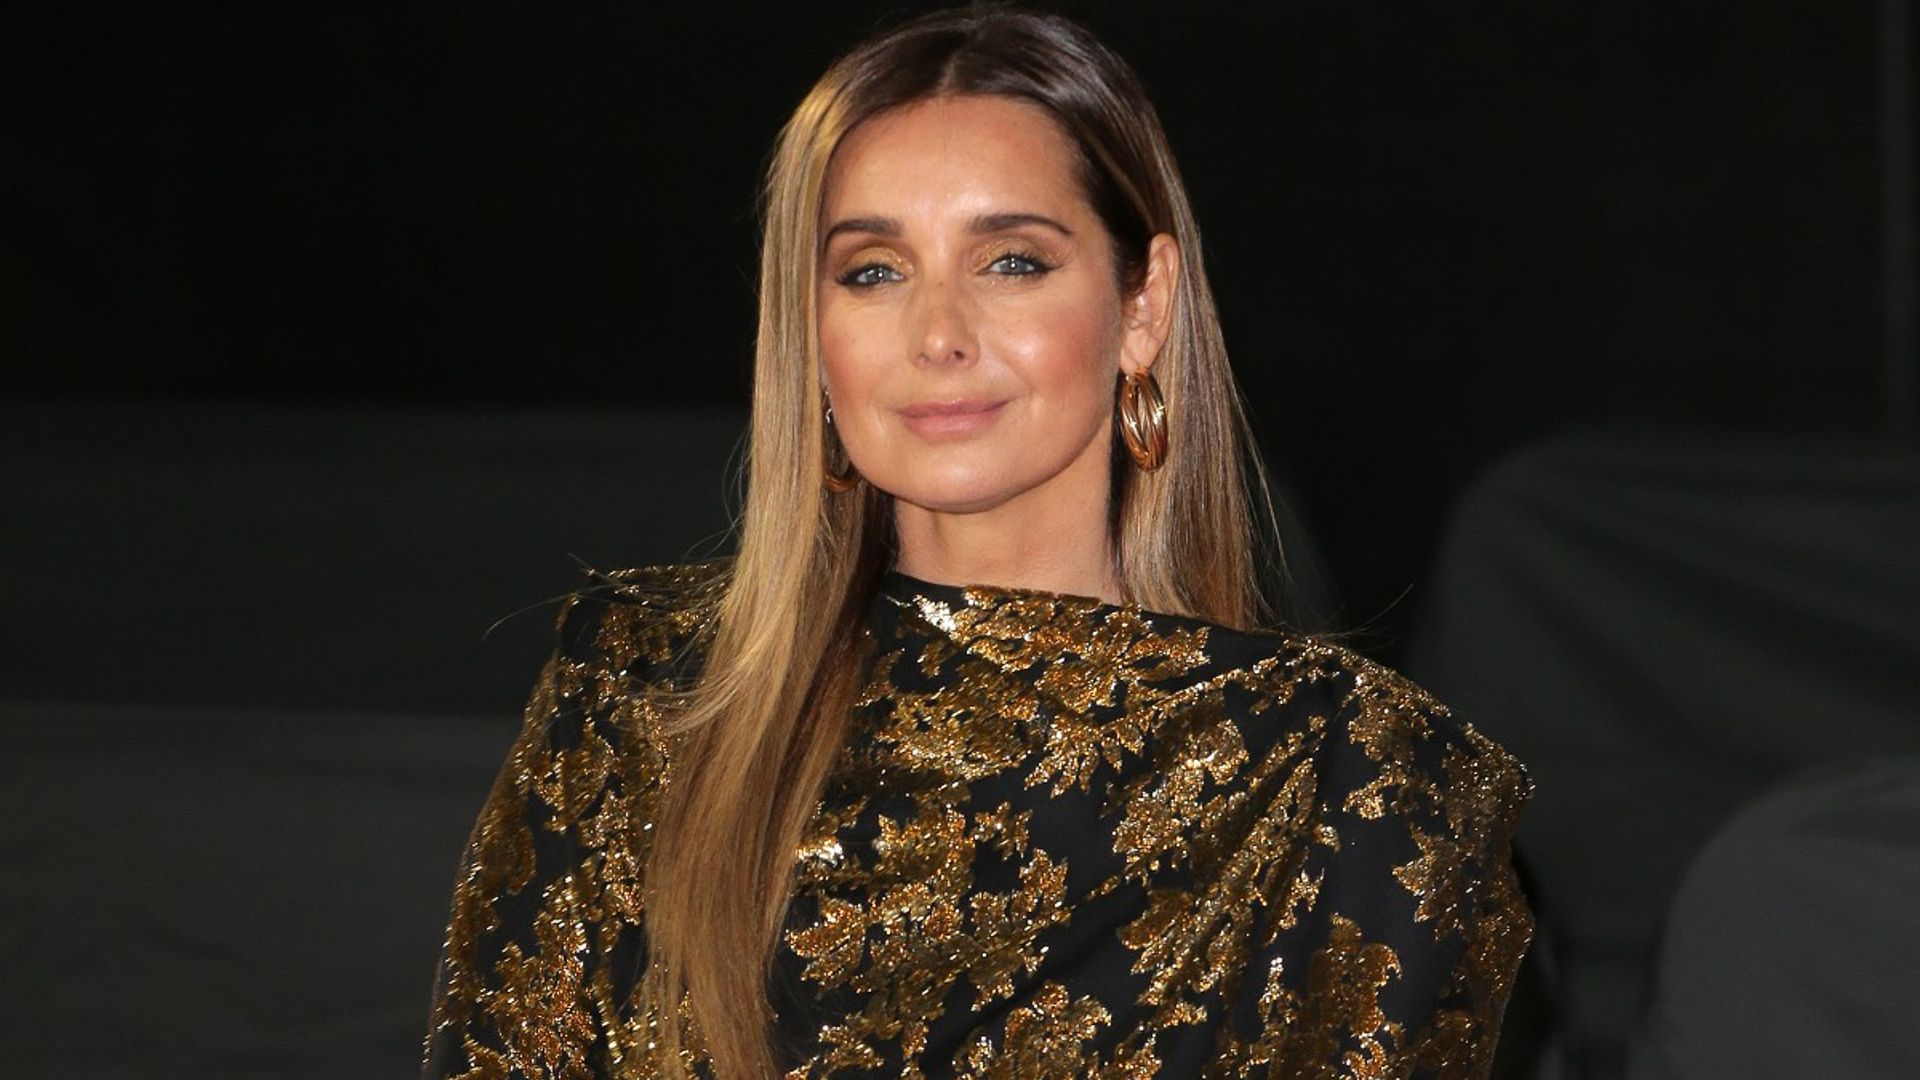 Louise Redknapp shows off racy new tattoo in latest photo - see picture